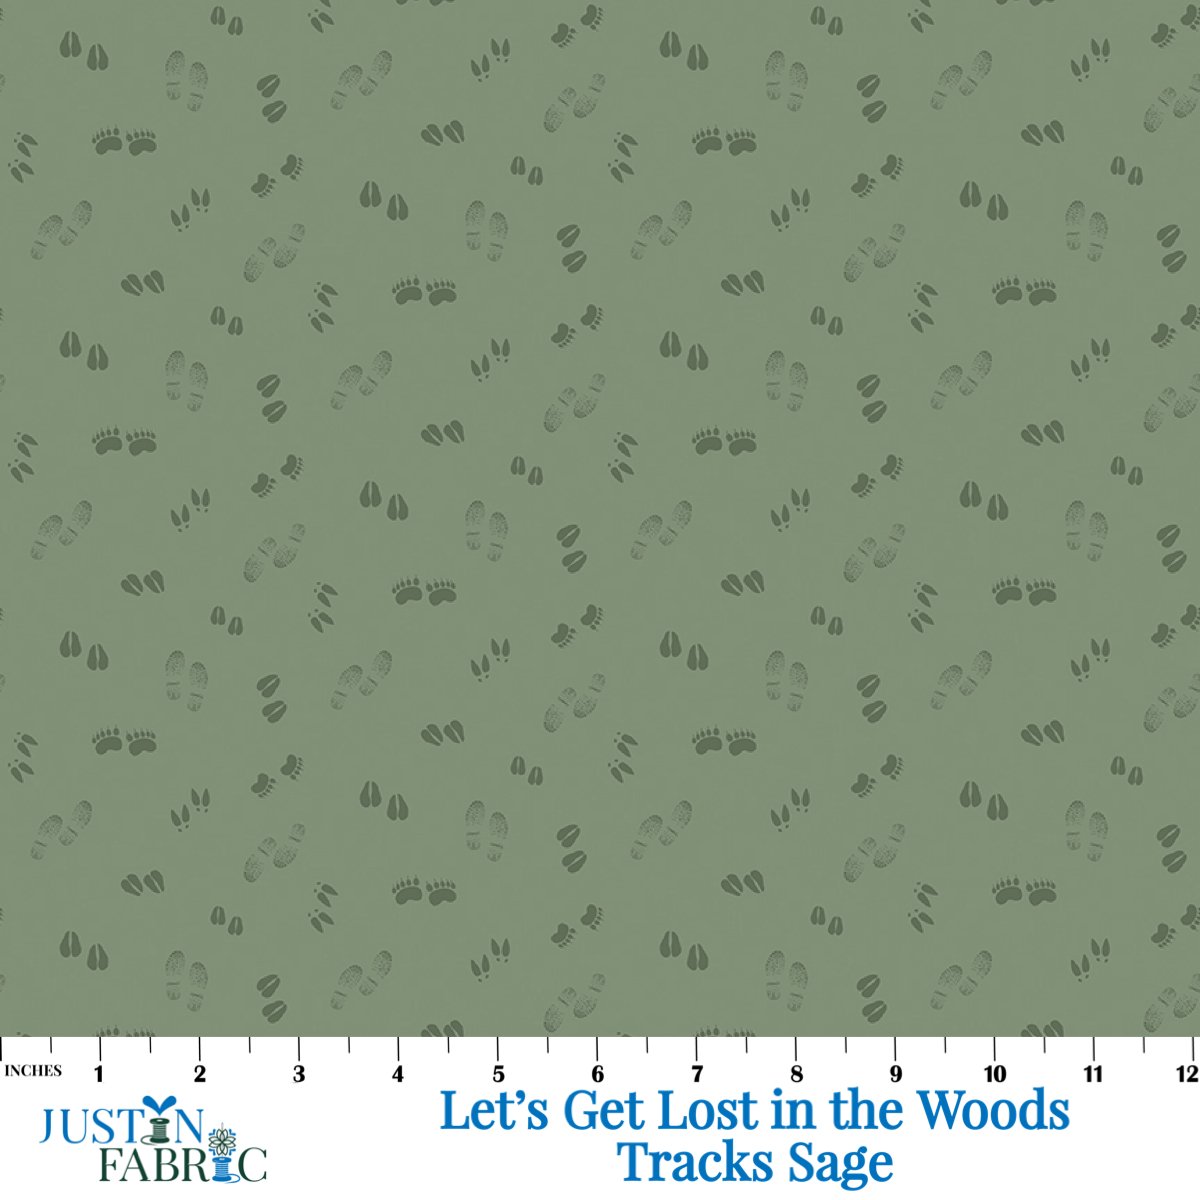 Let's Get Lost in the Woods Tracks Sage Fabric by Tara Reed | Riley Blake Designs with Tone-on-Tone scattered Animal Tracks